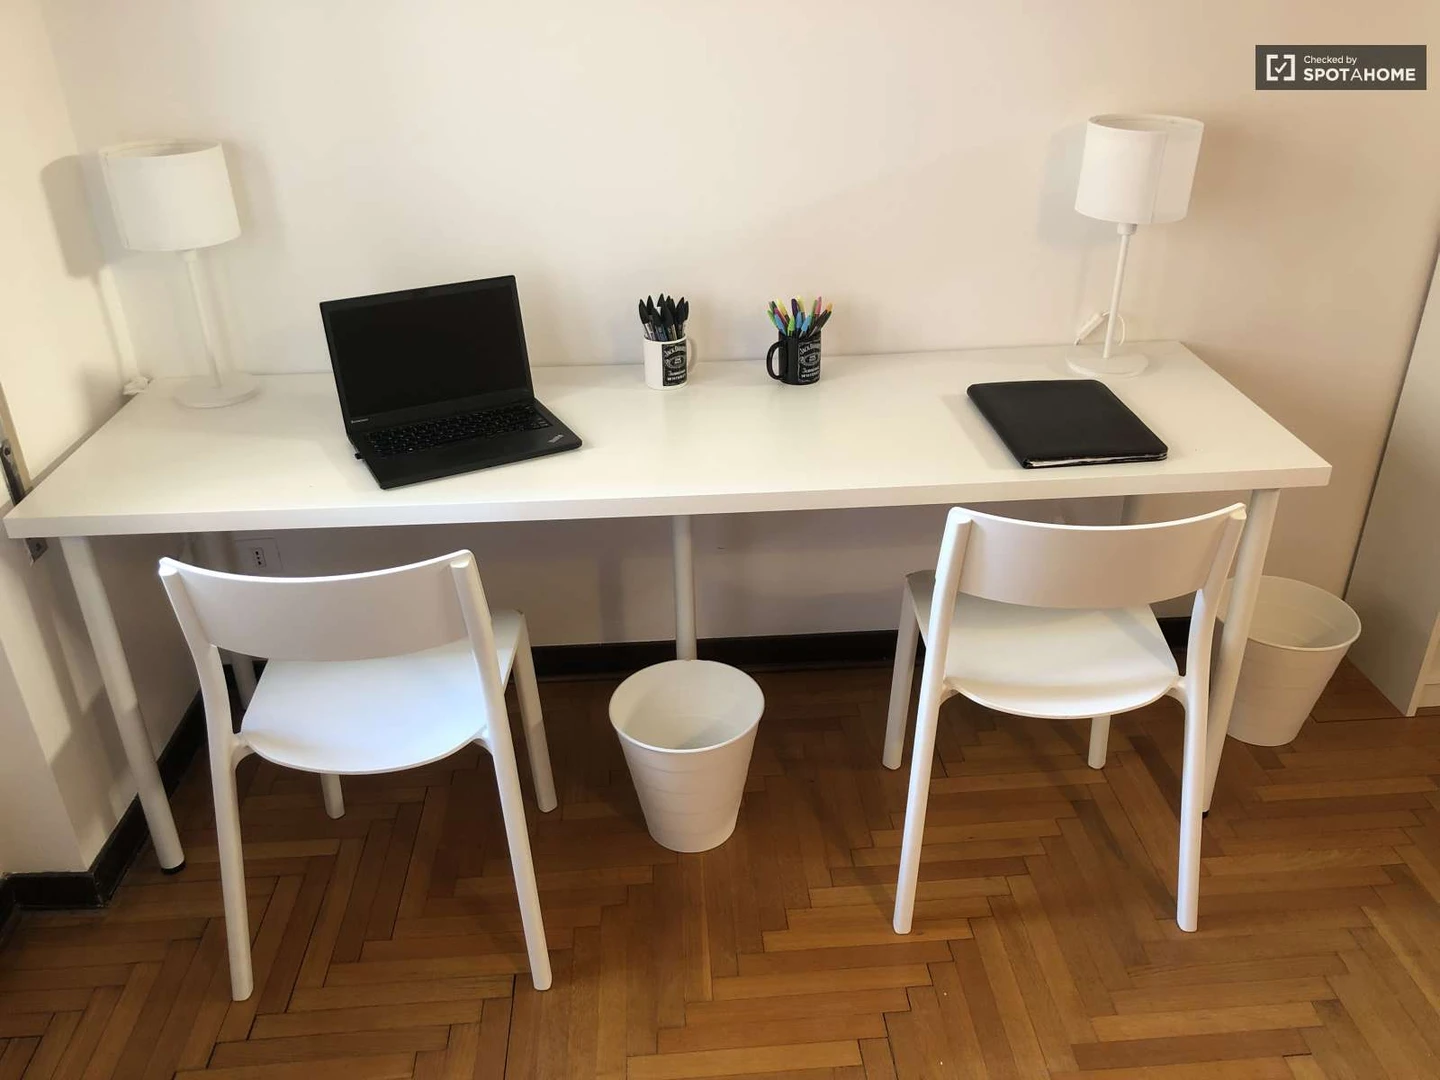 Renting rooms by the month in padova